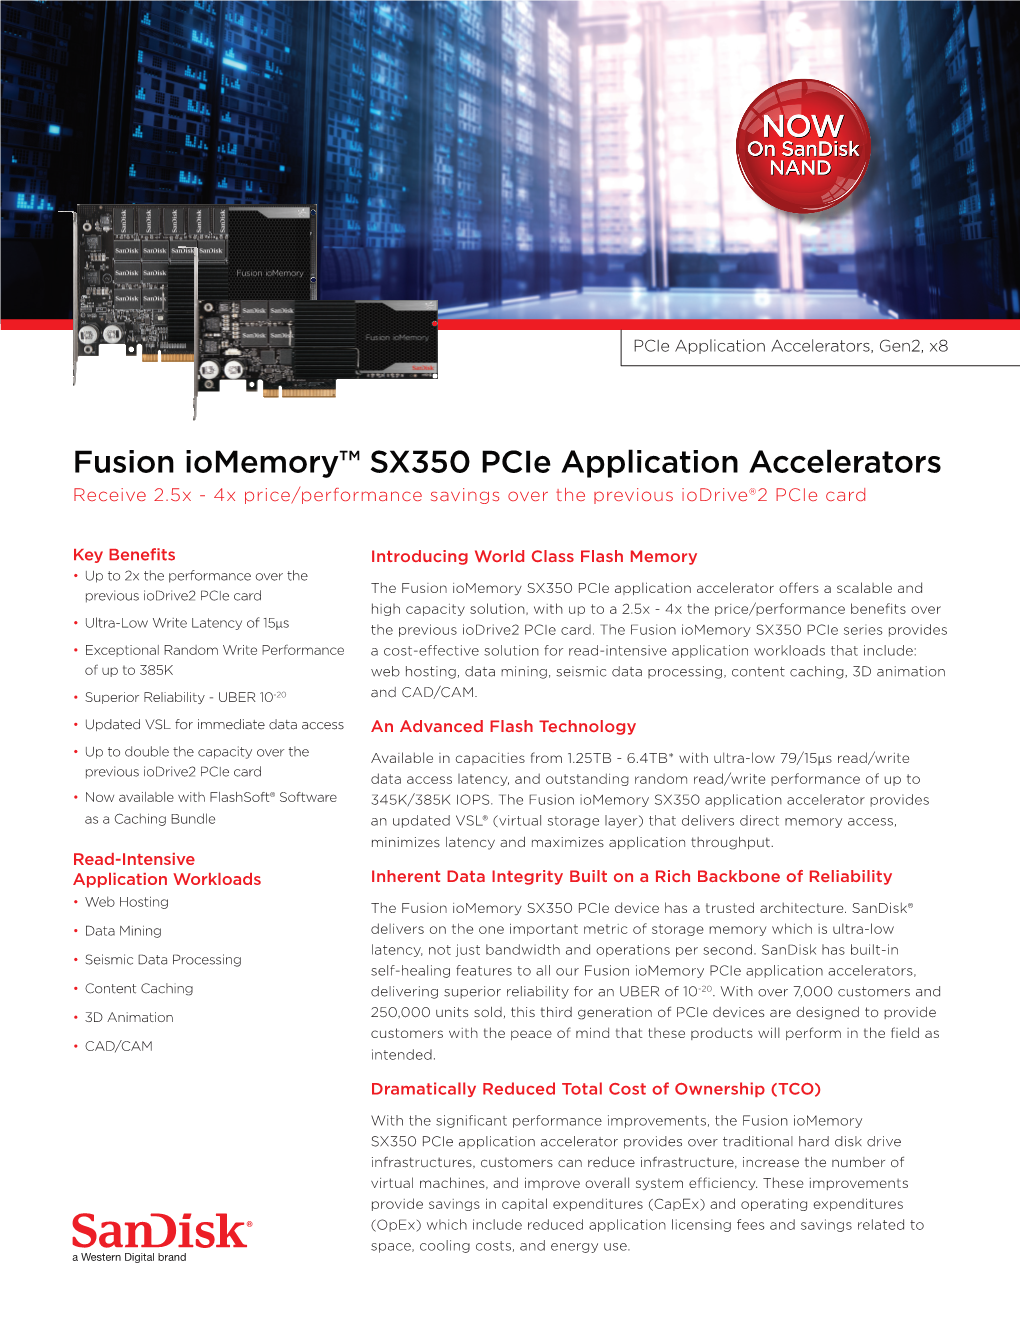 Fusion Iomemory™ SX350 Pcie Application Accelerators Receive 2.5X - 4X Price/Performance Savings Over the Previous Iodrive®2 Pcie Card